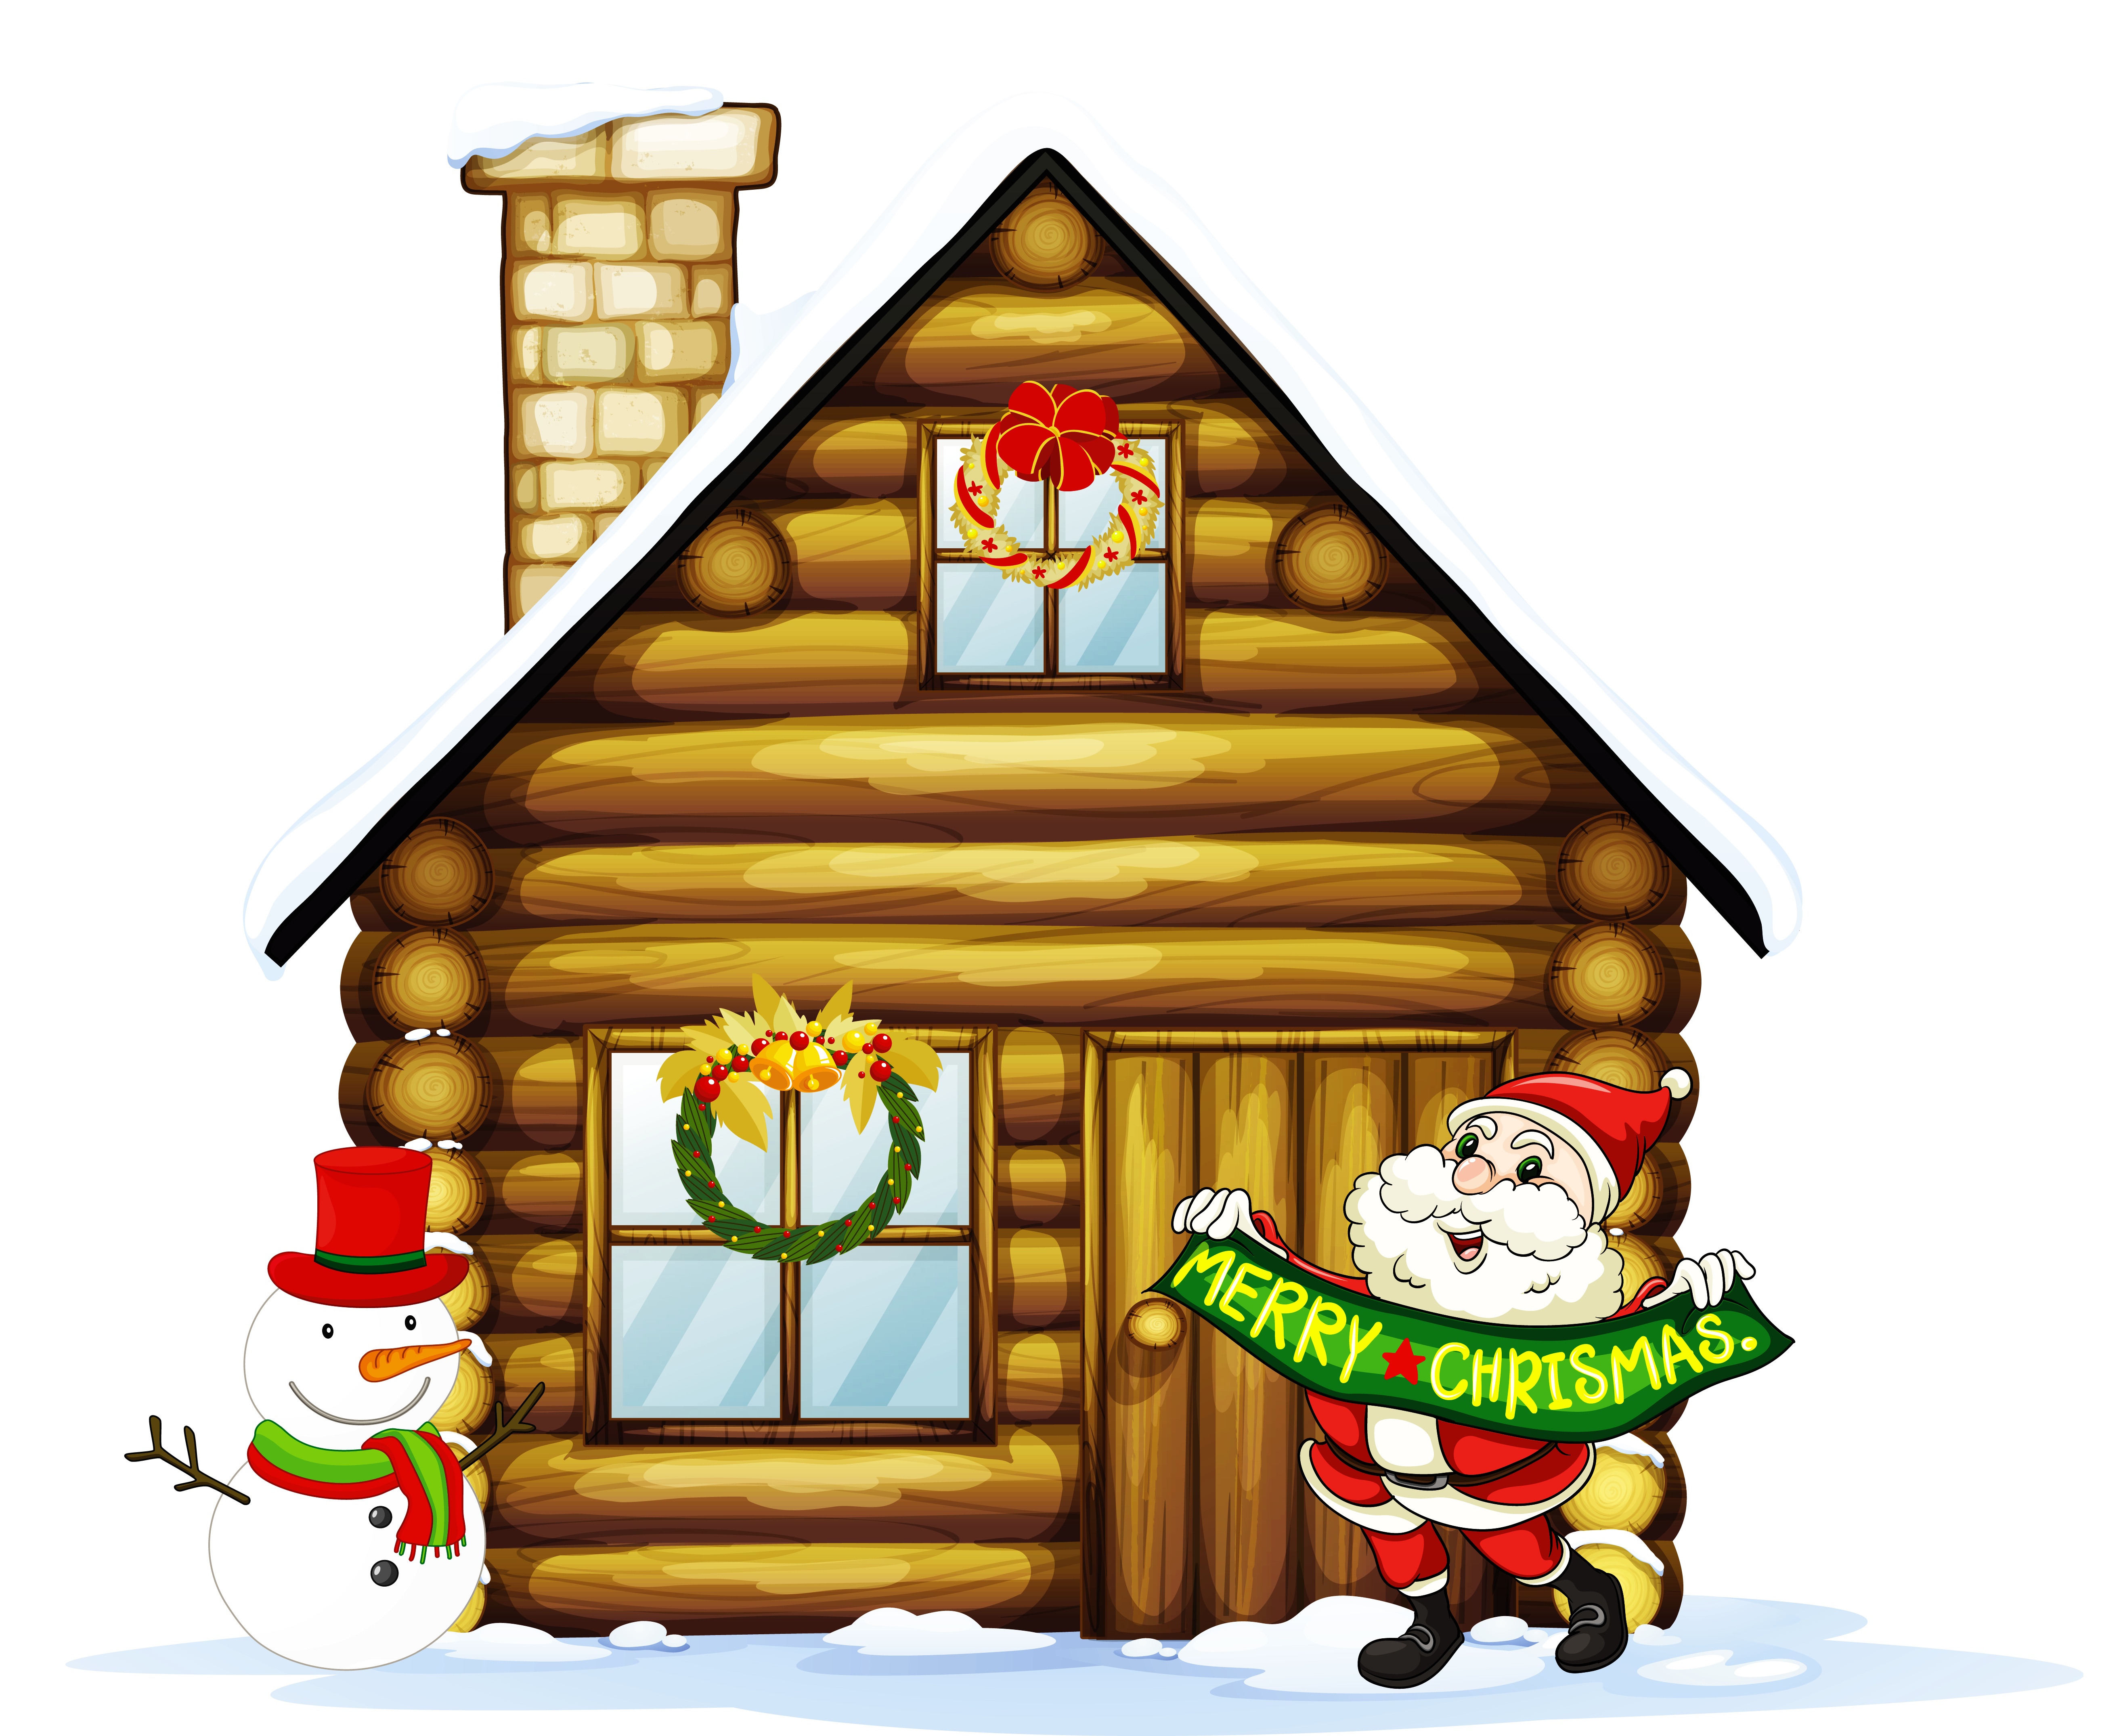 Transparent_Christmas_House_with_Santa_and_Snowman_Clipart.png?m=1416330540